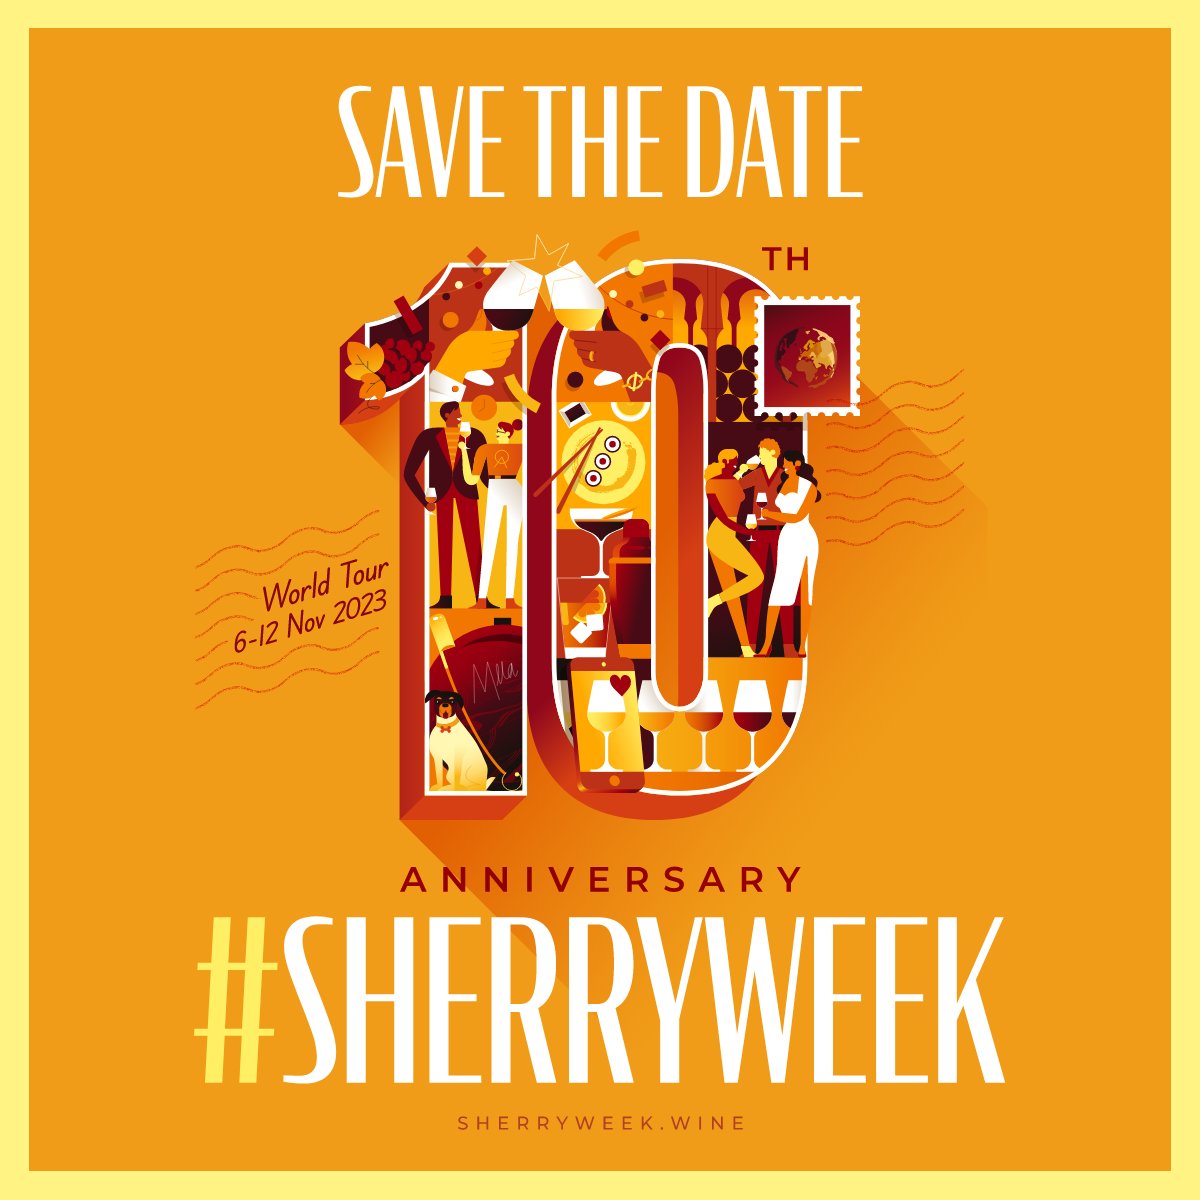 SAVE THE DATE! 🥳 Hey, all you #sherrylovers out there, get ready to clink glasses with your favorite wines for an epic reason: the 10th anniversary of Sherry Week! Check out sherryweek.wine - Downloads available! Cheers to #sherryweek